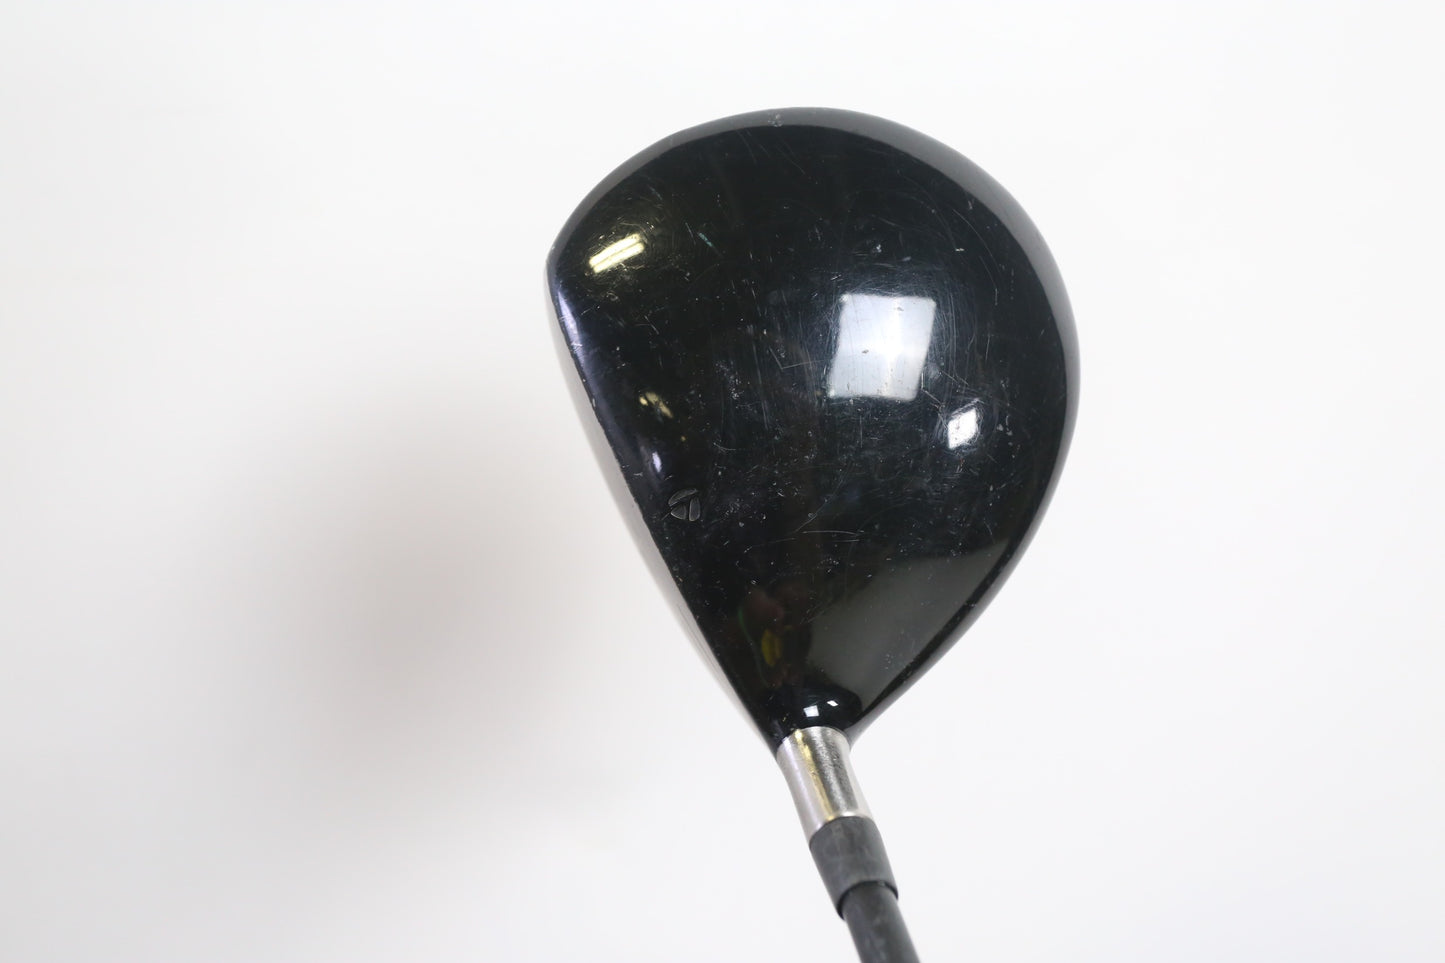 Used TaylorMade R540 Driver - Right-Handed - 9.5 Degrees - Regular Flex